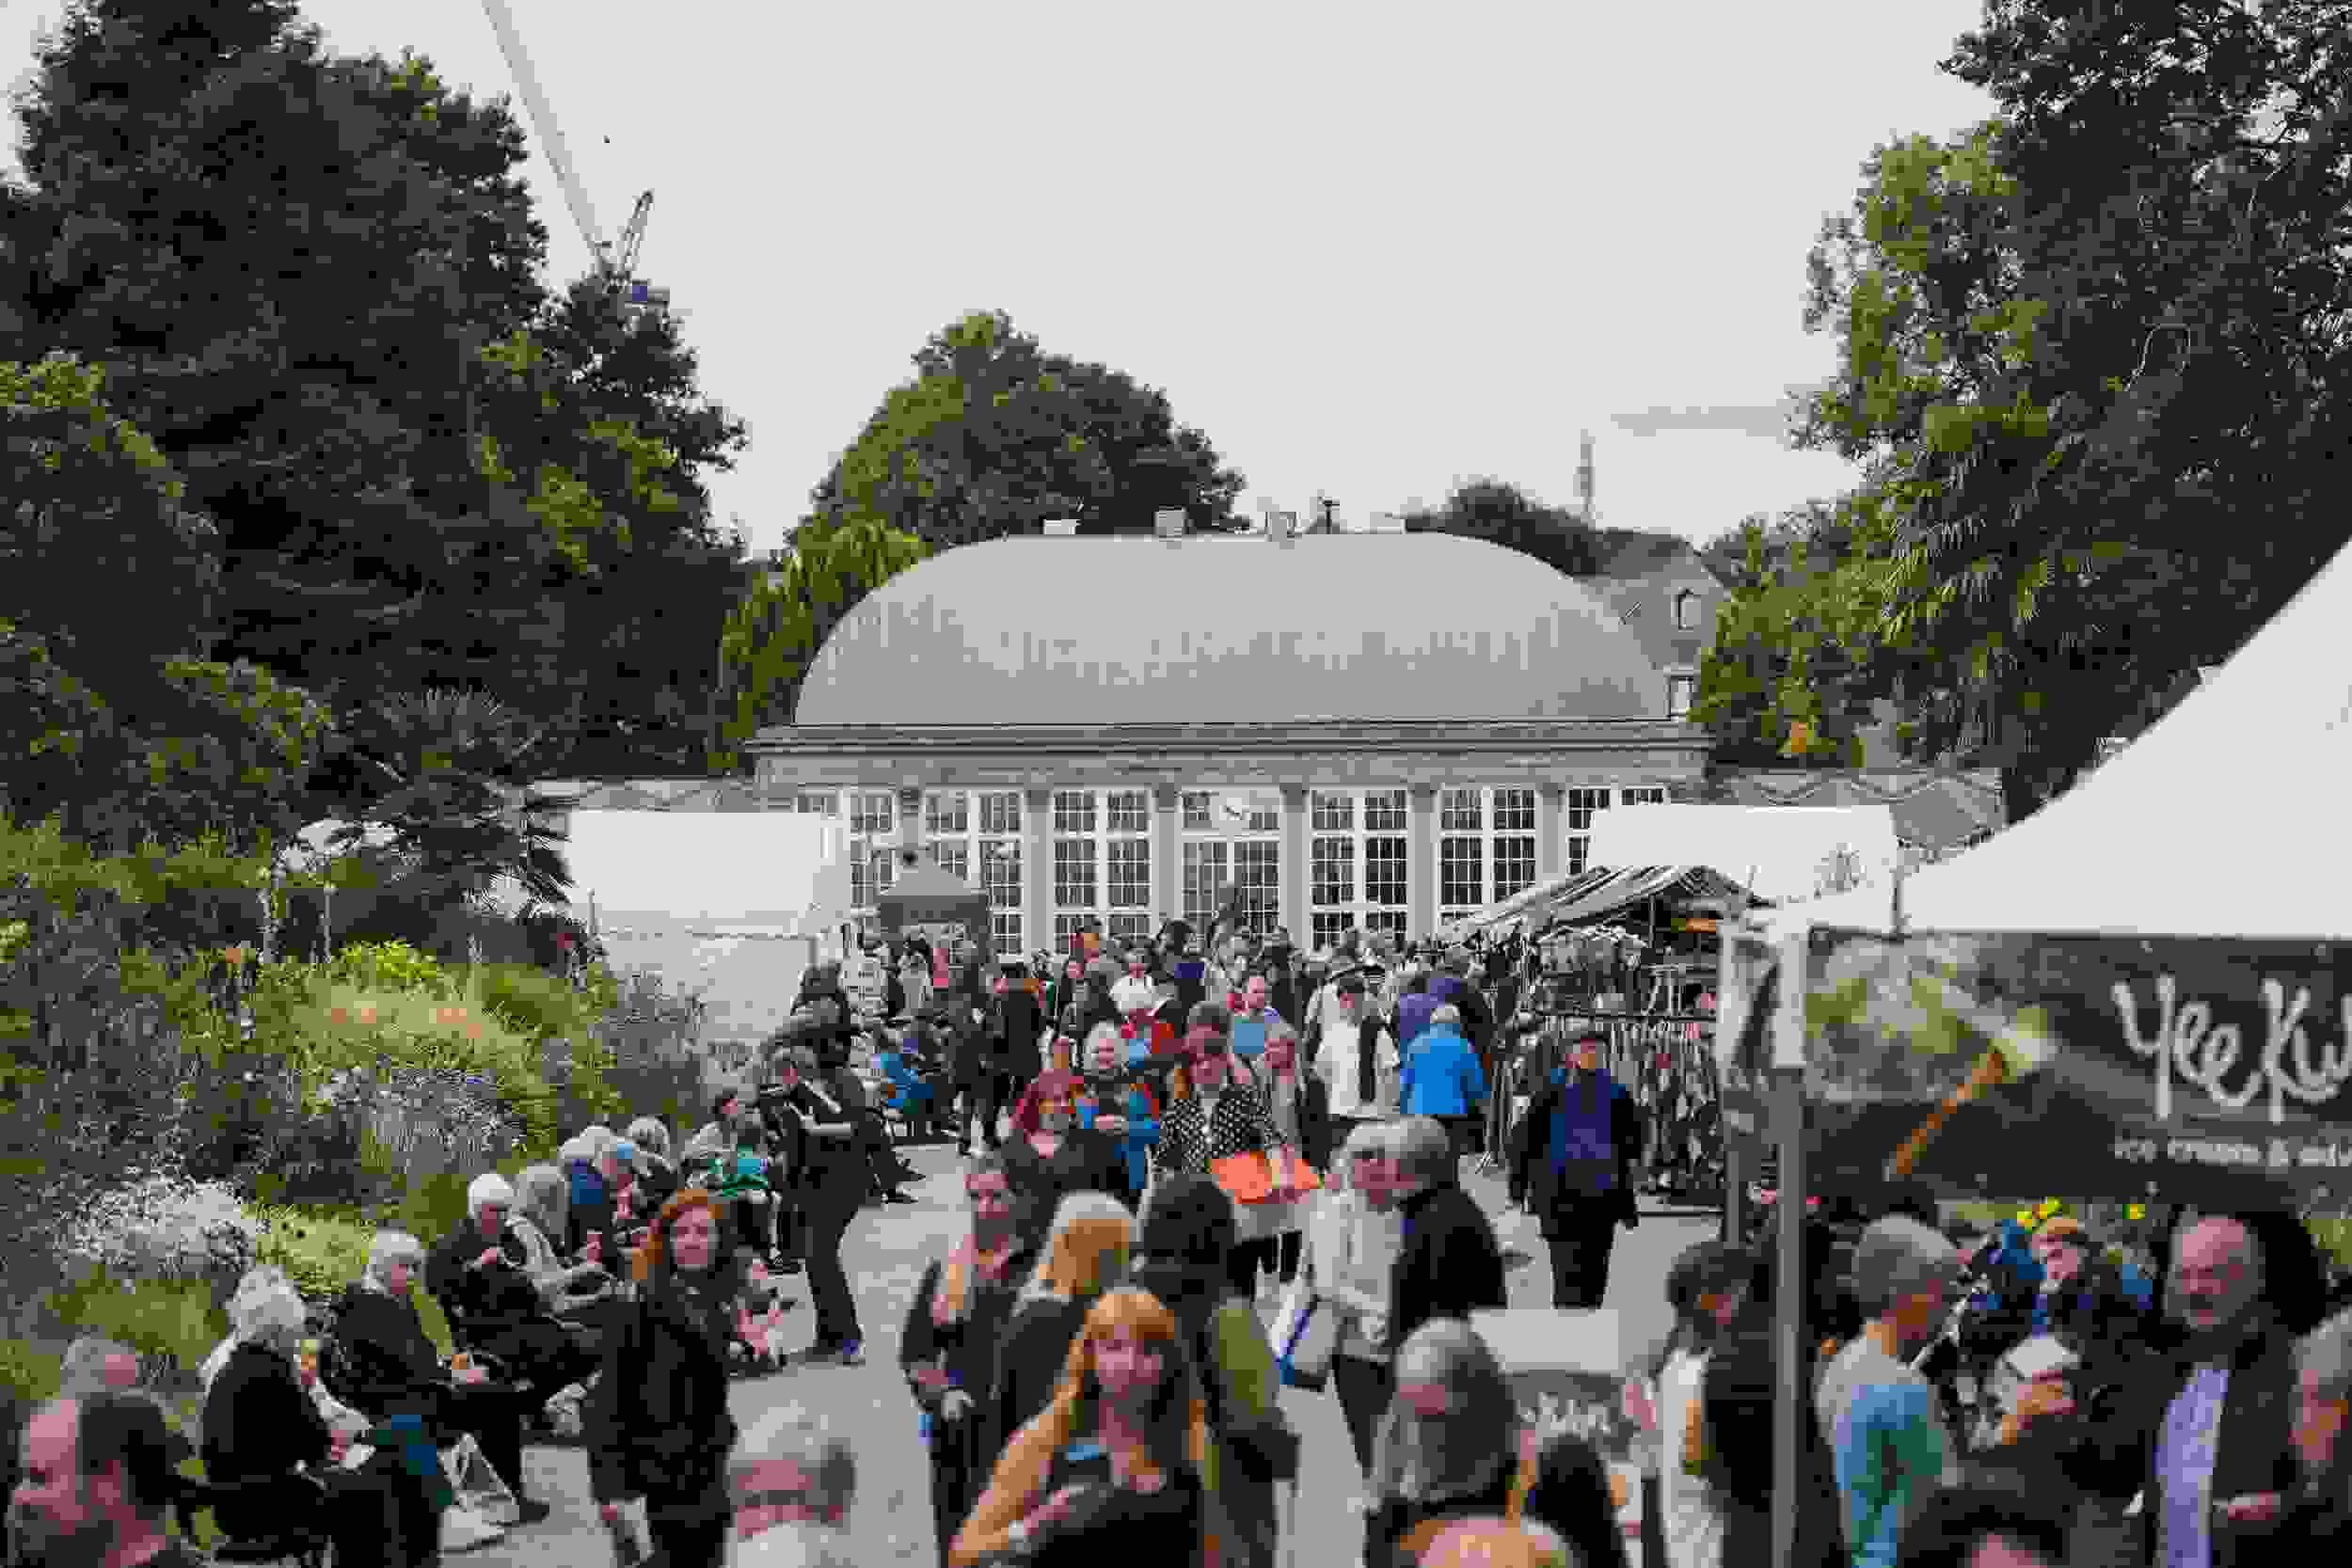 A shot of Sheffield's Botanical Gardens greenhouse, with lots of people walking on the path in front